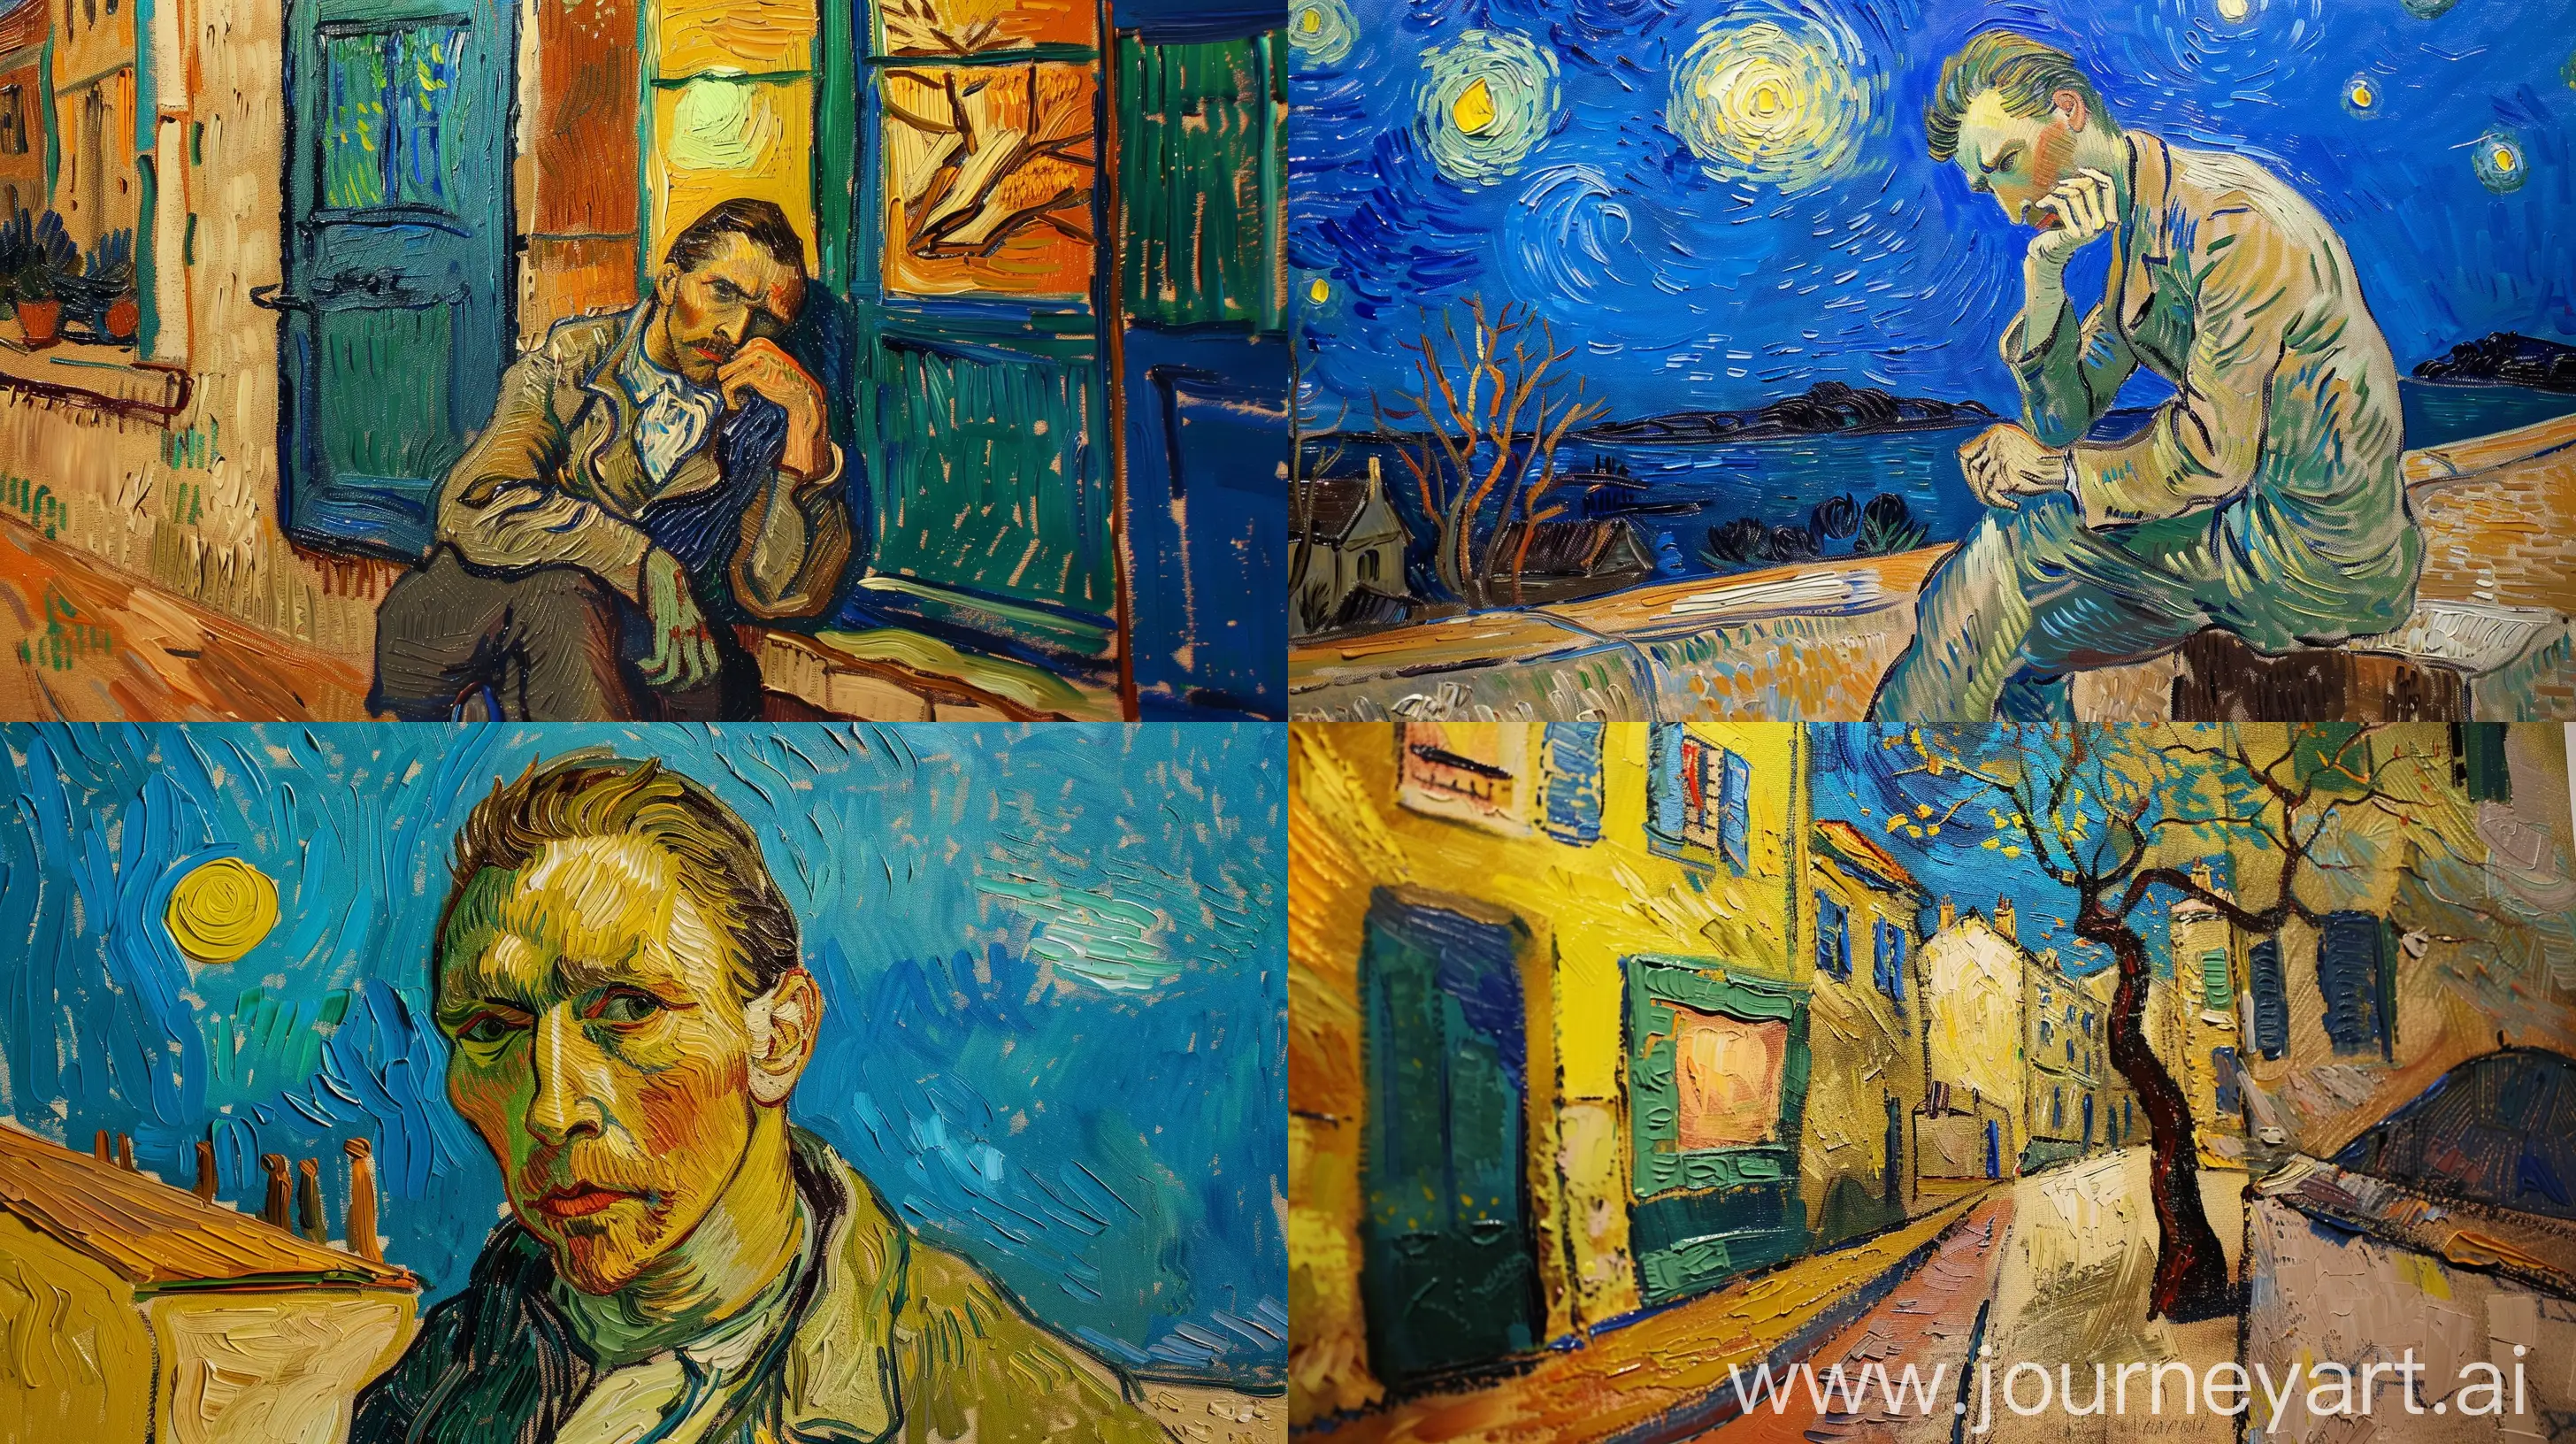 Starry-Night-Portrait-in-Van-Gogh-Style-with-Enigmatic-Figures